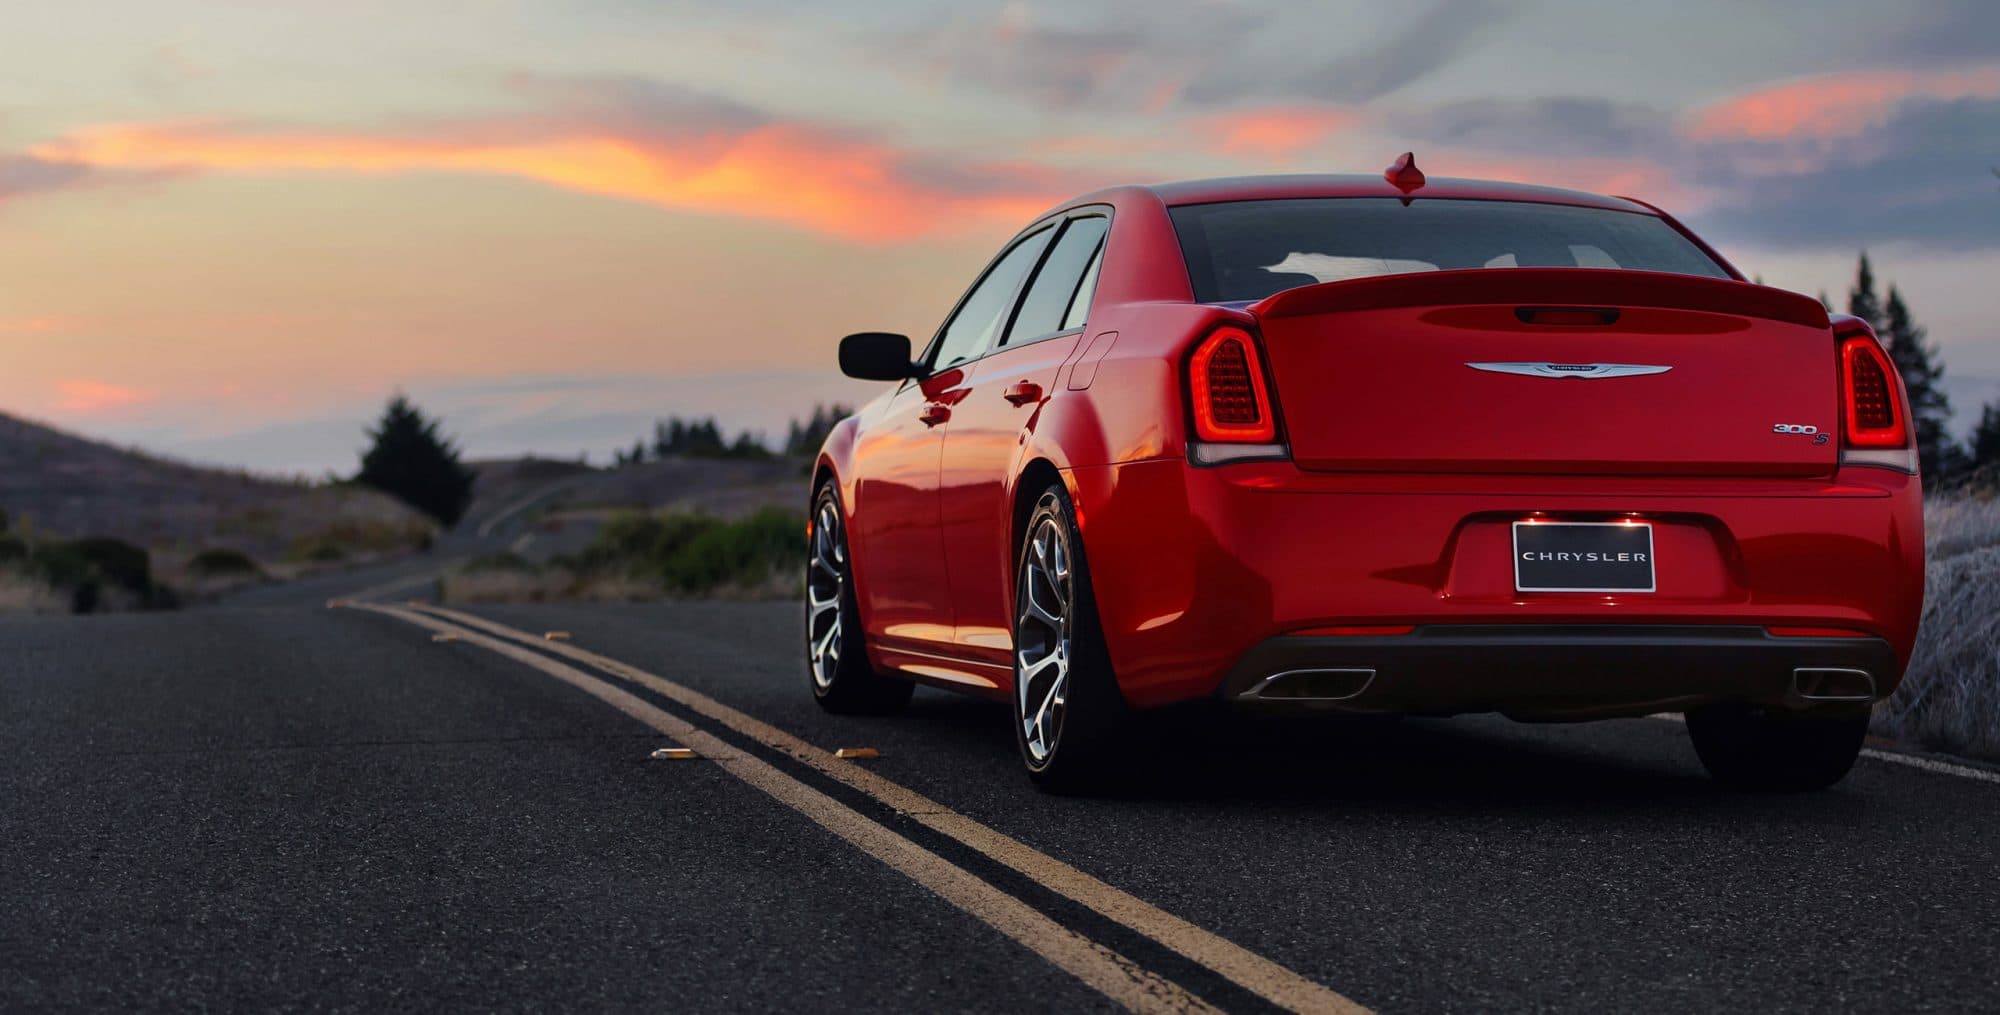 Red 2018 Chrysler 300 on highway from behind